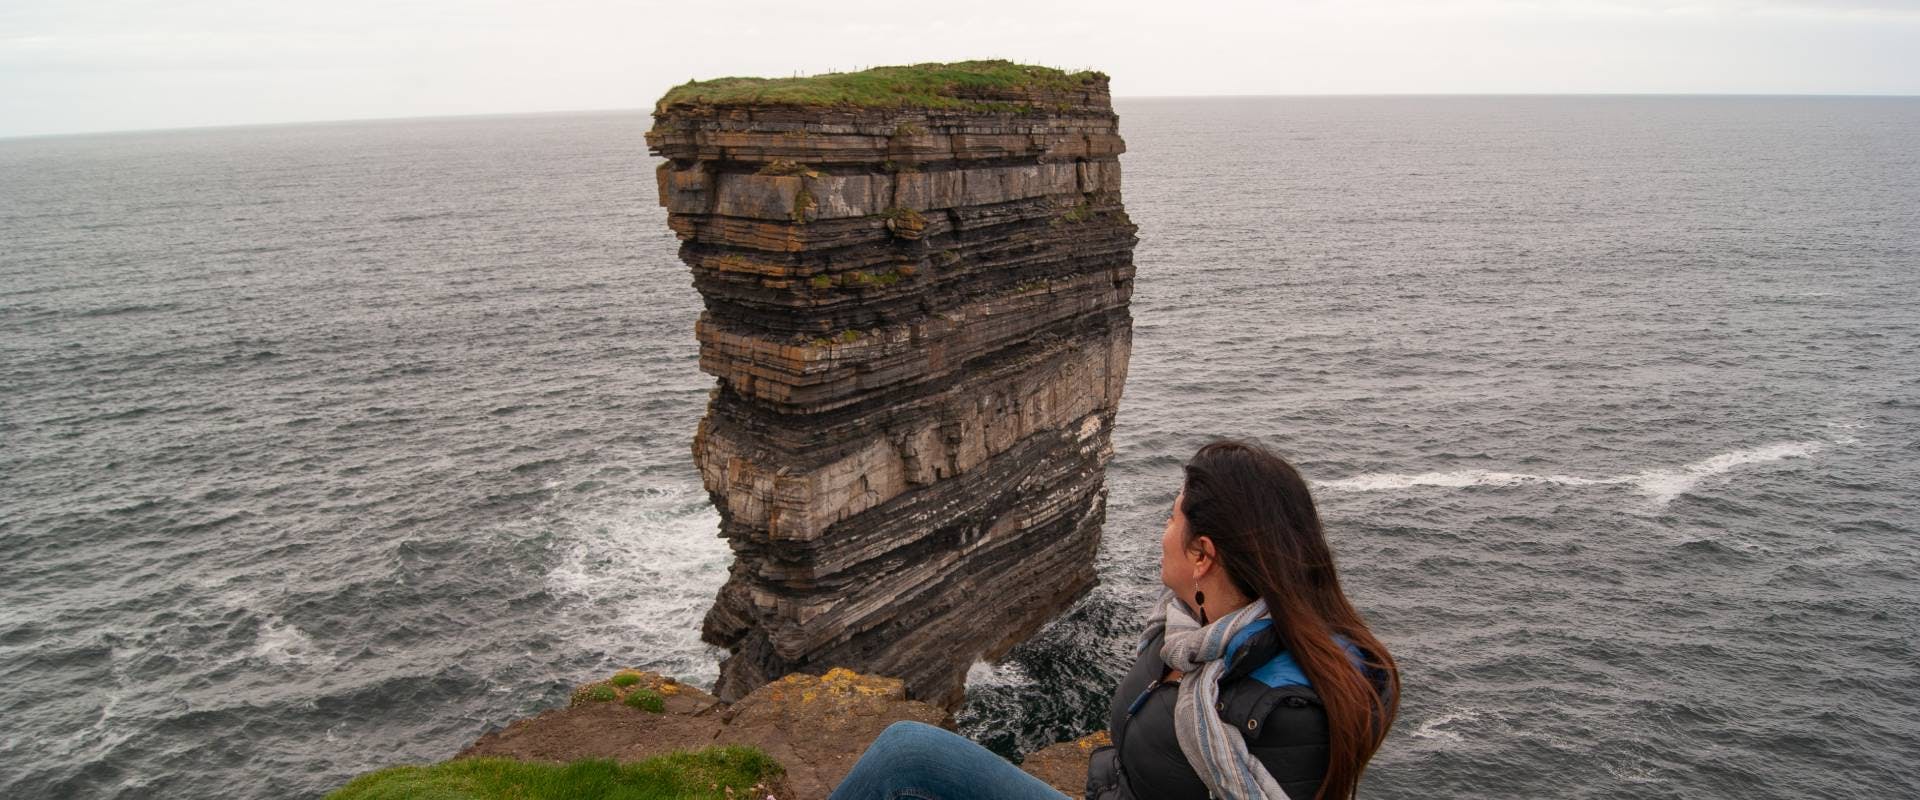 solo female traveler in ireland at the cliffs of moher